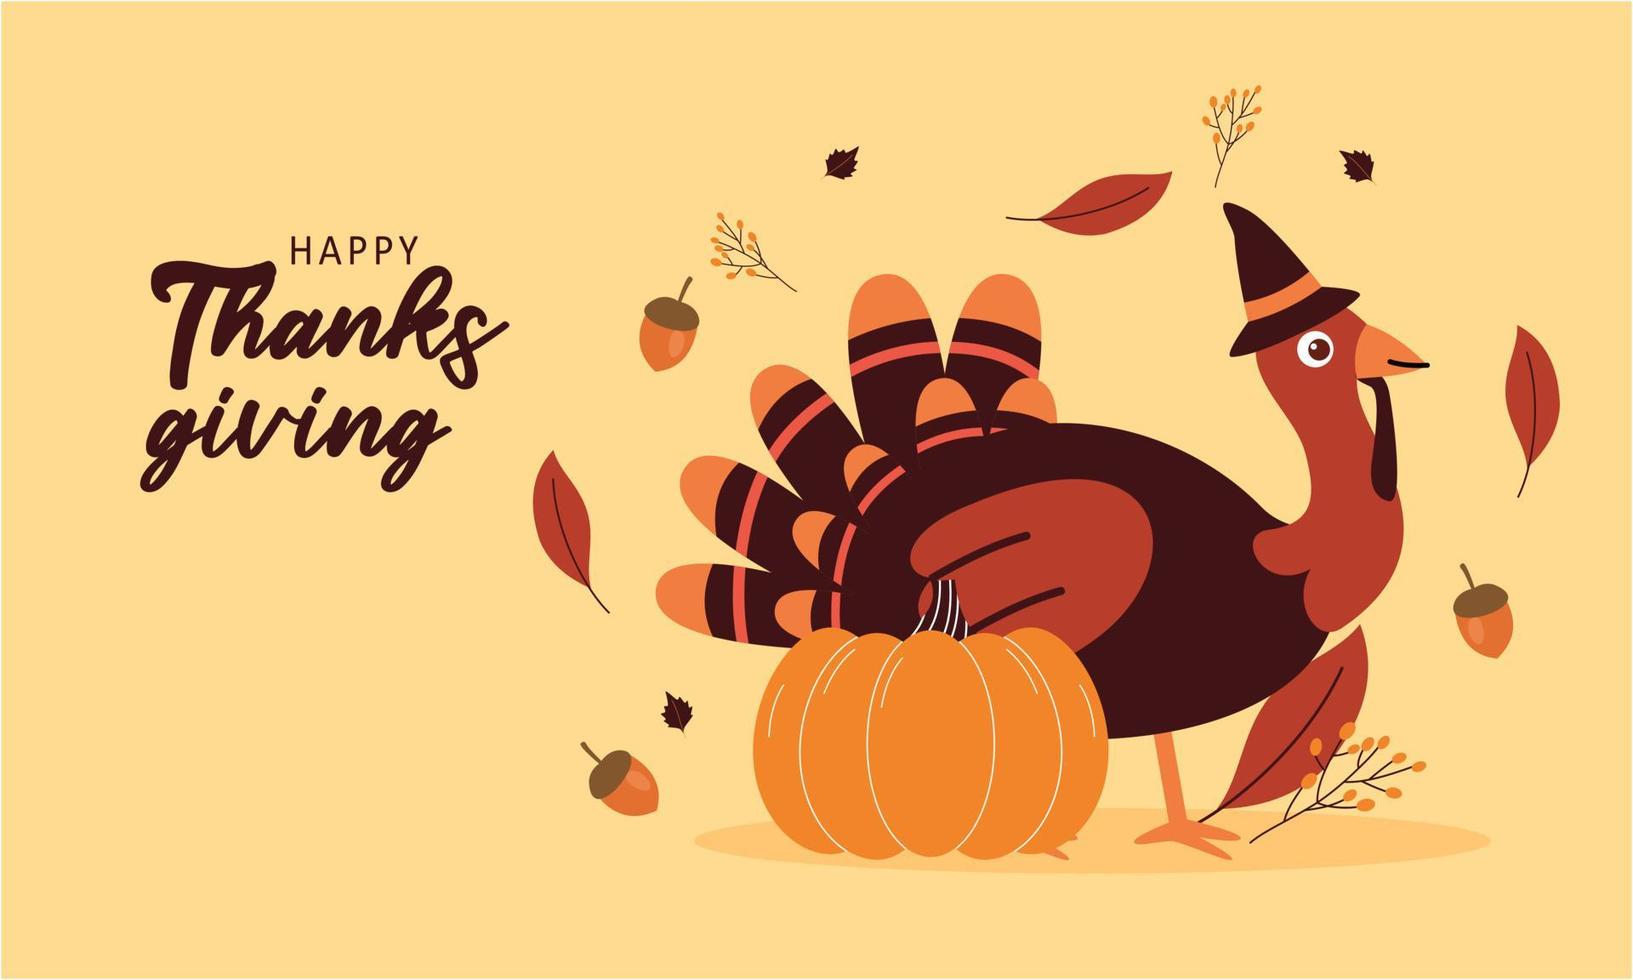 Happy thanksgiving background in flat design vector